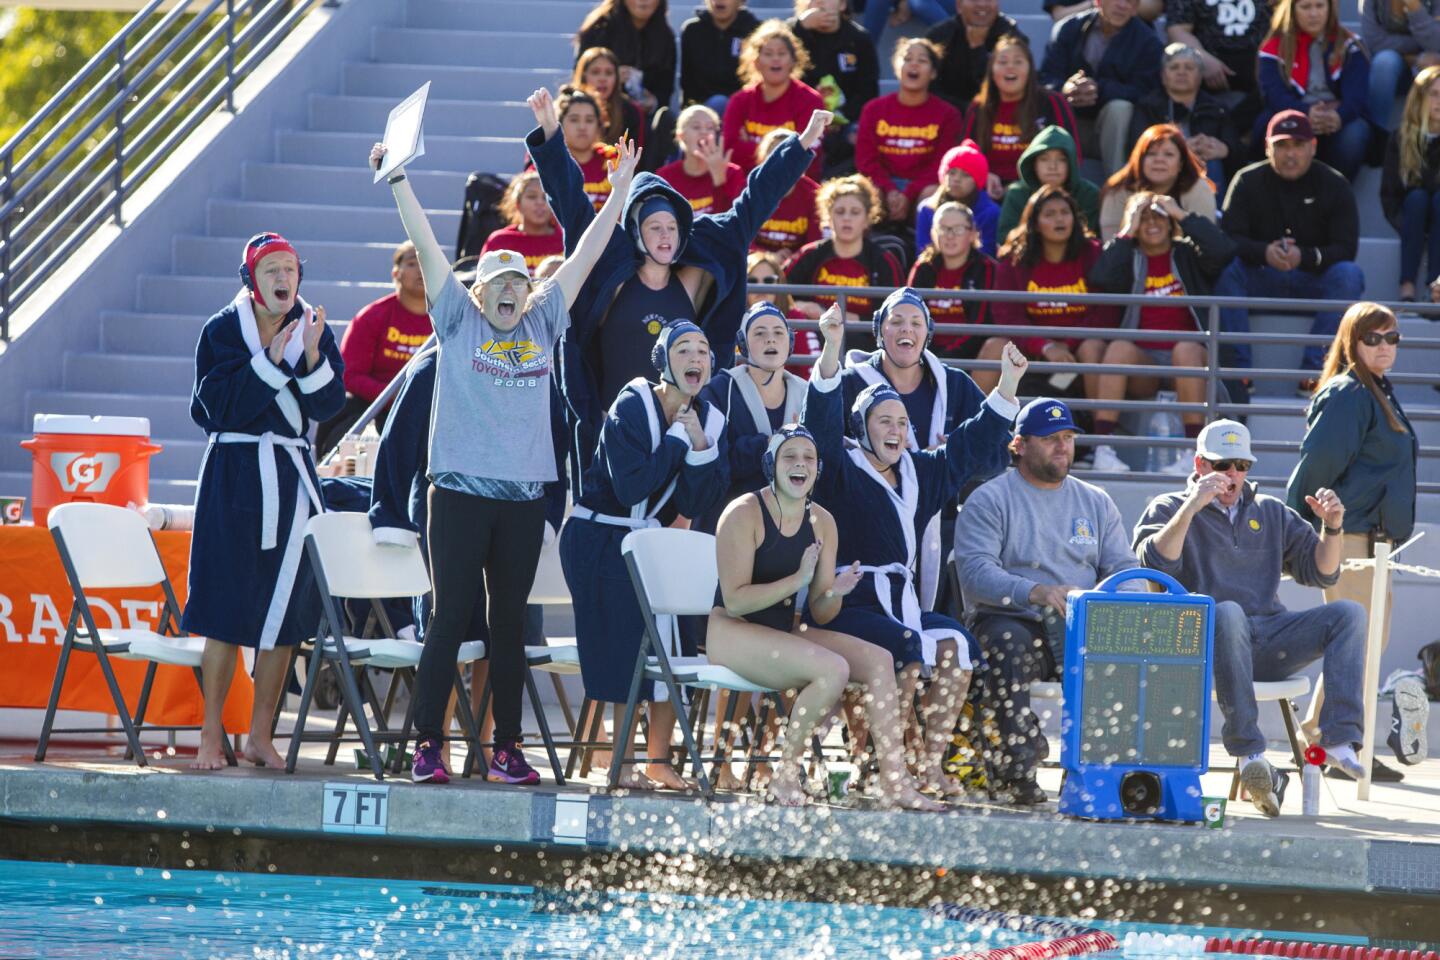 Newport Harbor girls' water polo team celebrates a 4-3 victory over Santa Barbara in the CIF Southern Section Division 2 championship game at Woollett Aquatics Center on Saturday, February 24.